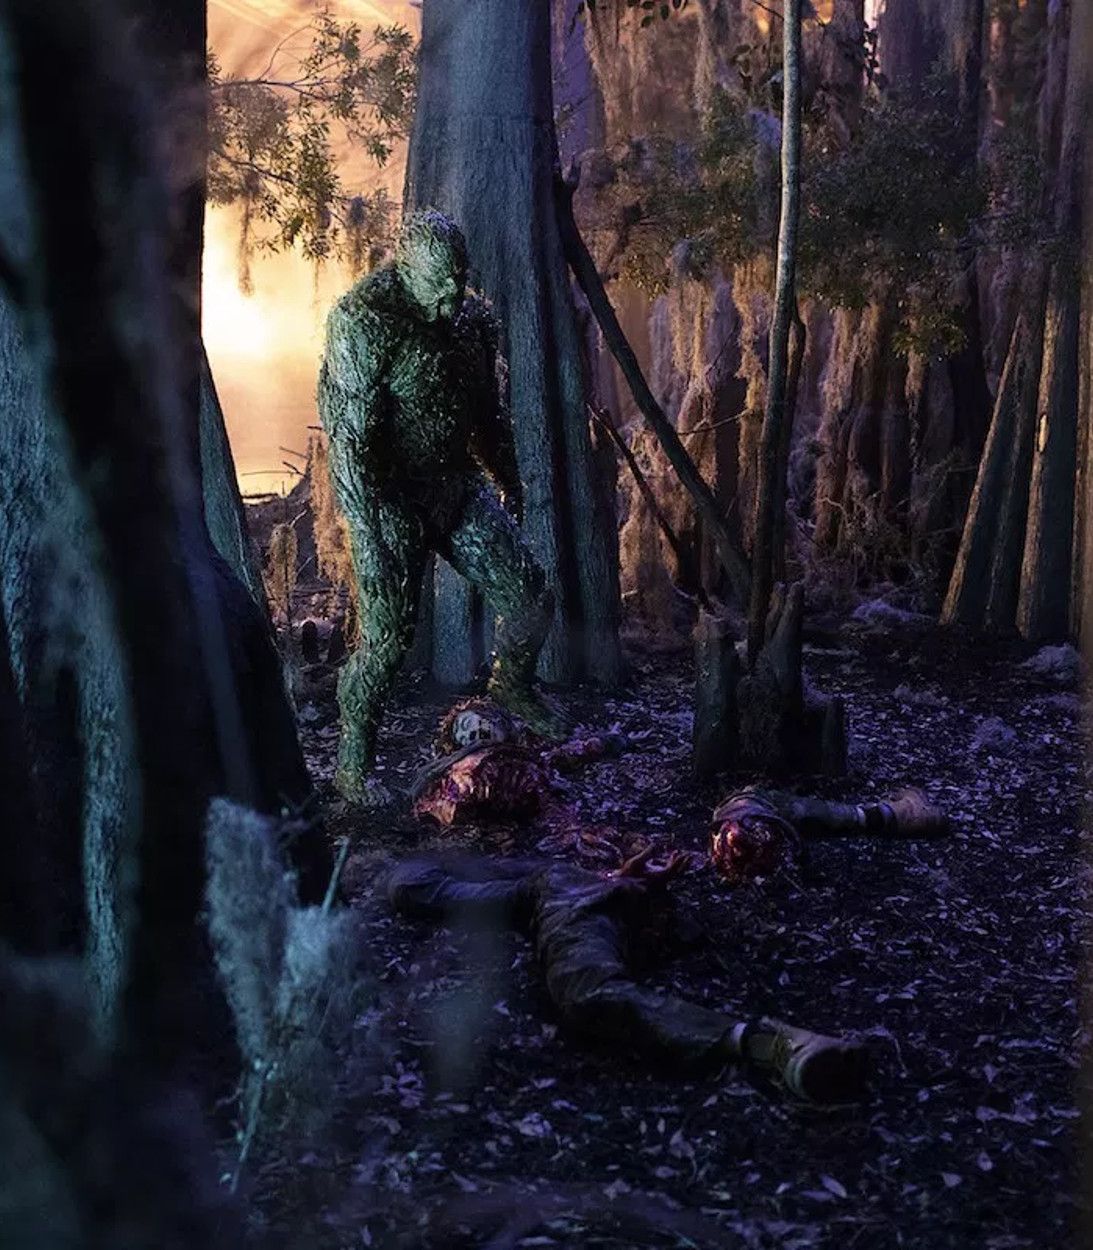 Swamp Thing with Munson's Corpse In Swamp vertical